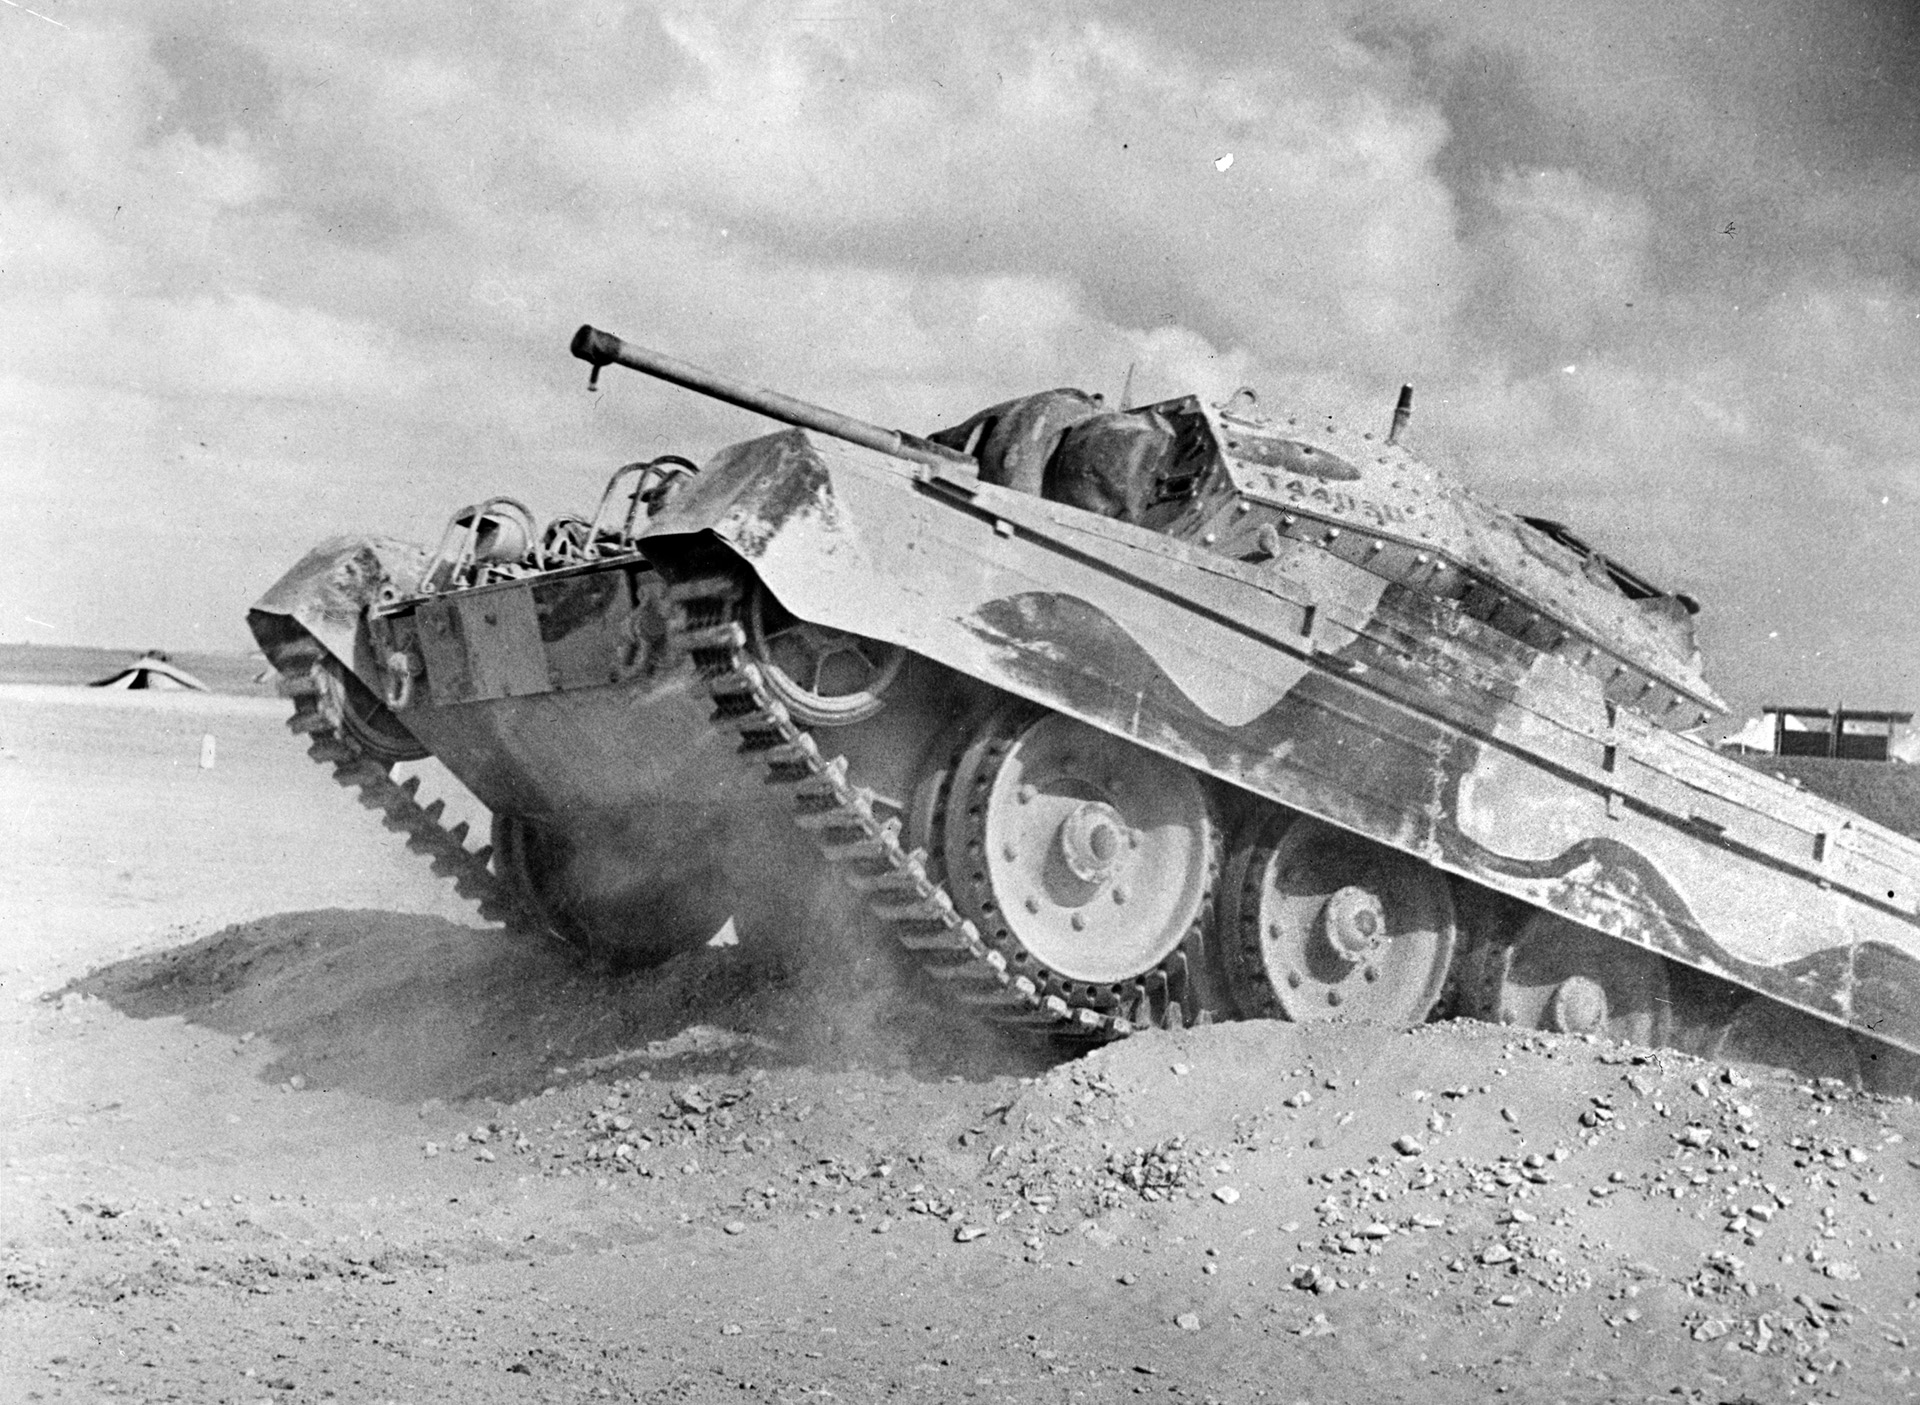 Although woefully inferior to German panzers, the British Crusader tank was issued to the South African division until greater numbers of Shermans were available. Here a Crusader Mk.1 with its relatively ineffective 6-pounder gun and its crew train in a Middle East desert.